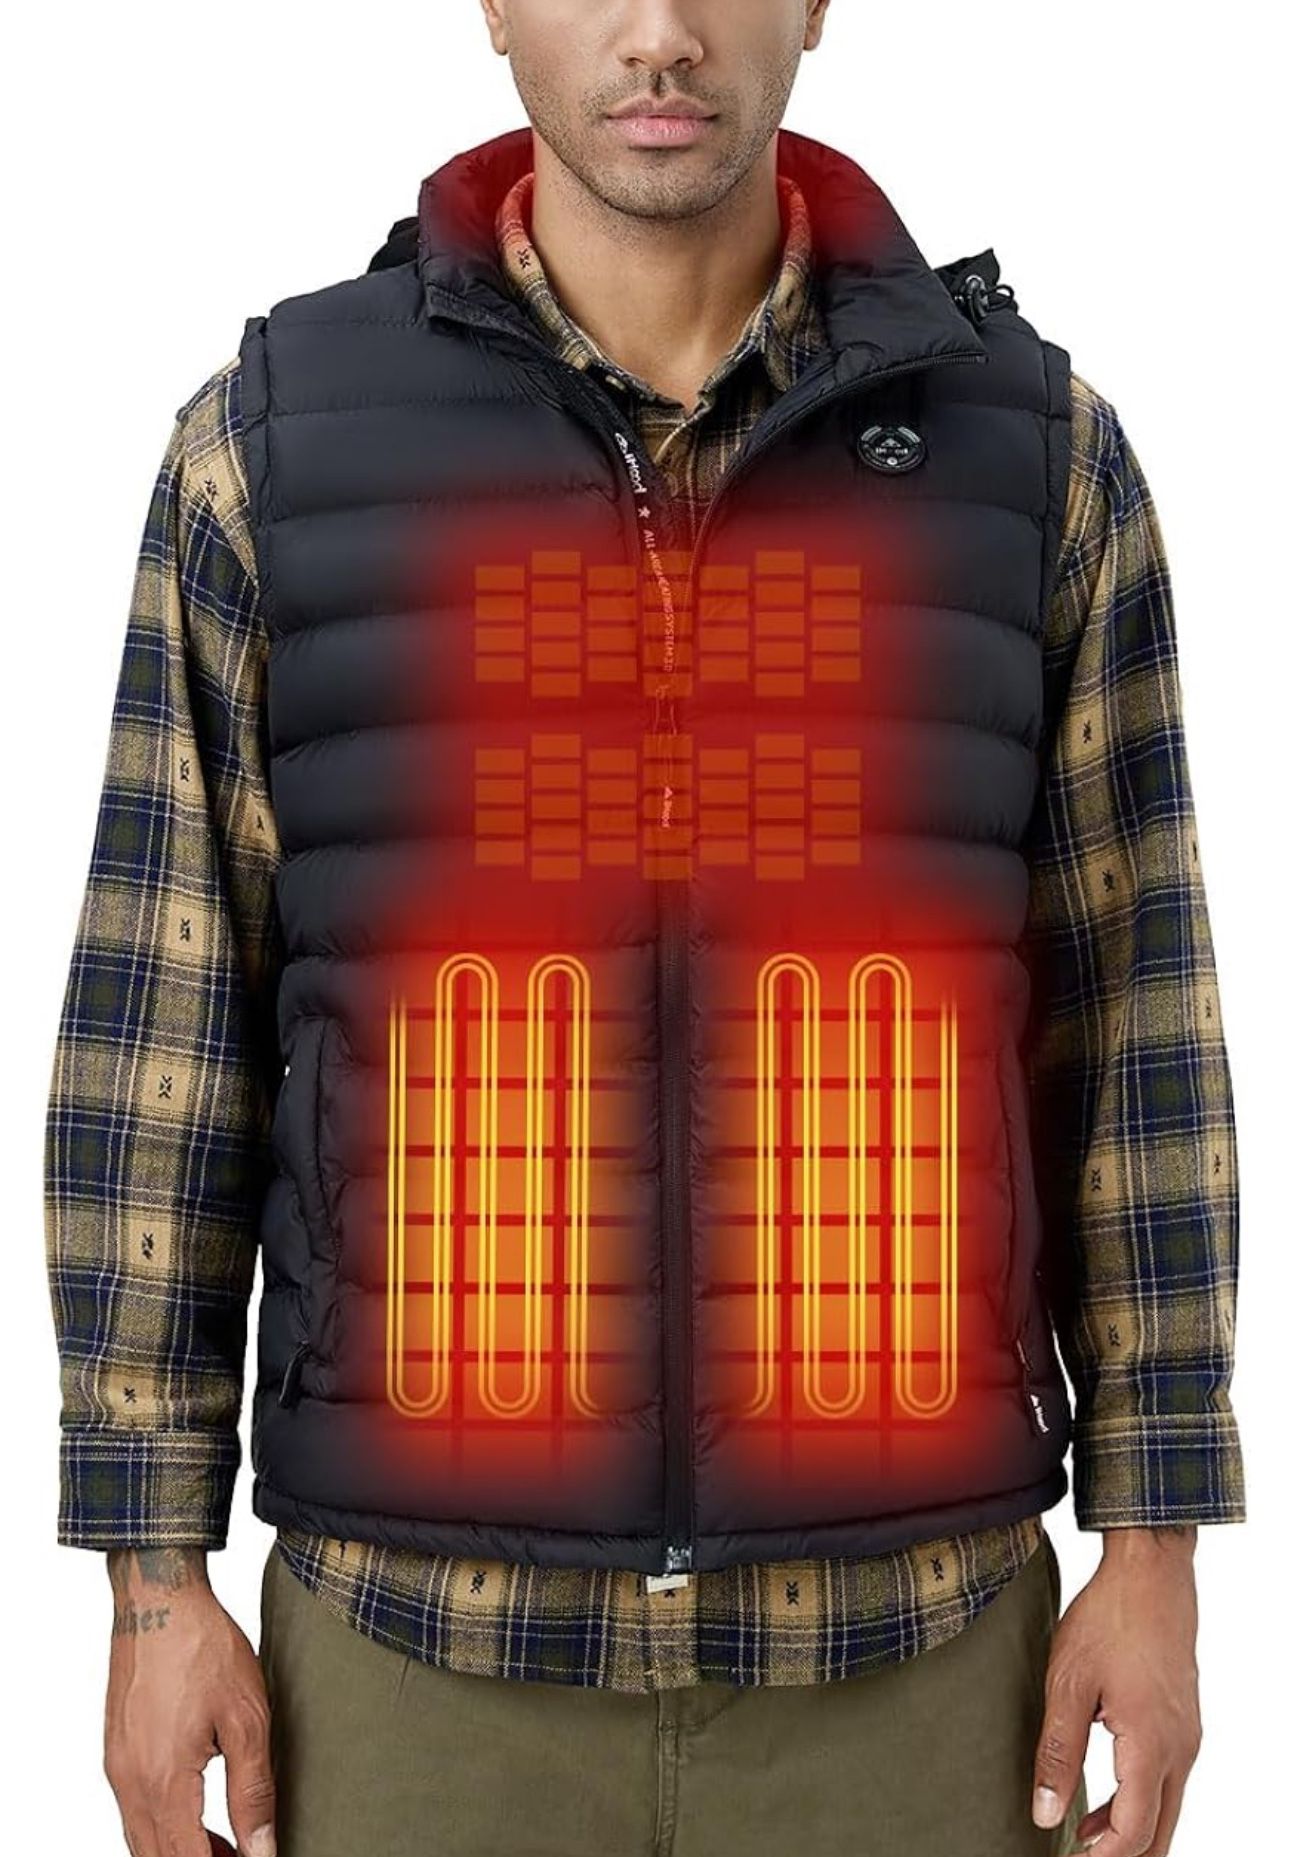 NEW iHood Mens Heated Vest with Battery Pack W/Retractable Heated Hood Black M